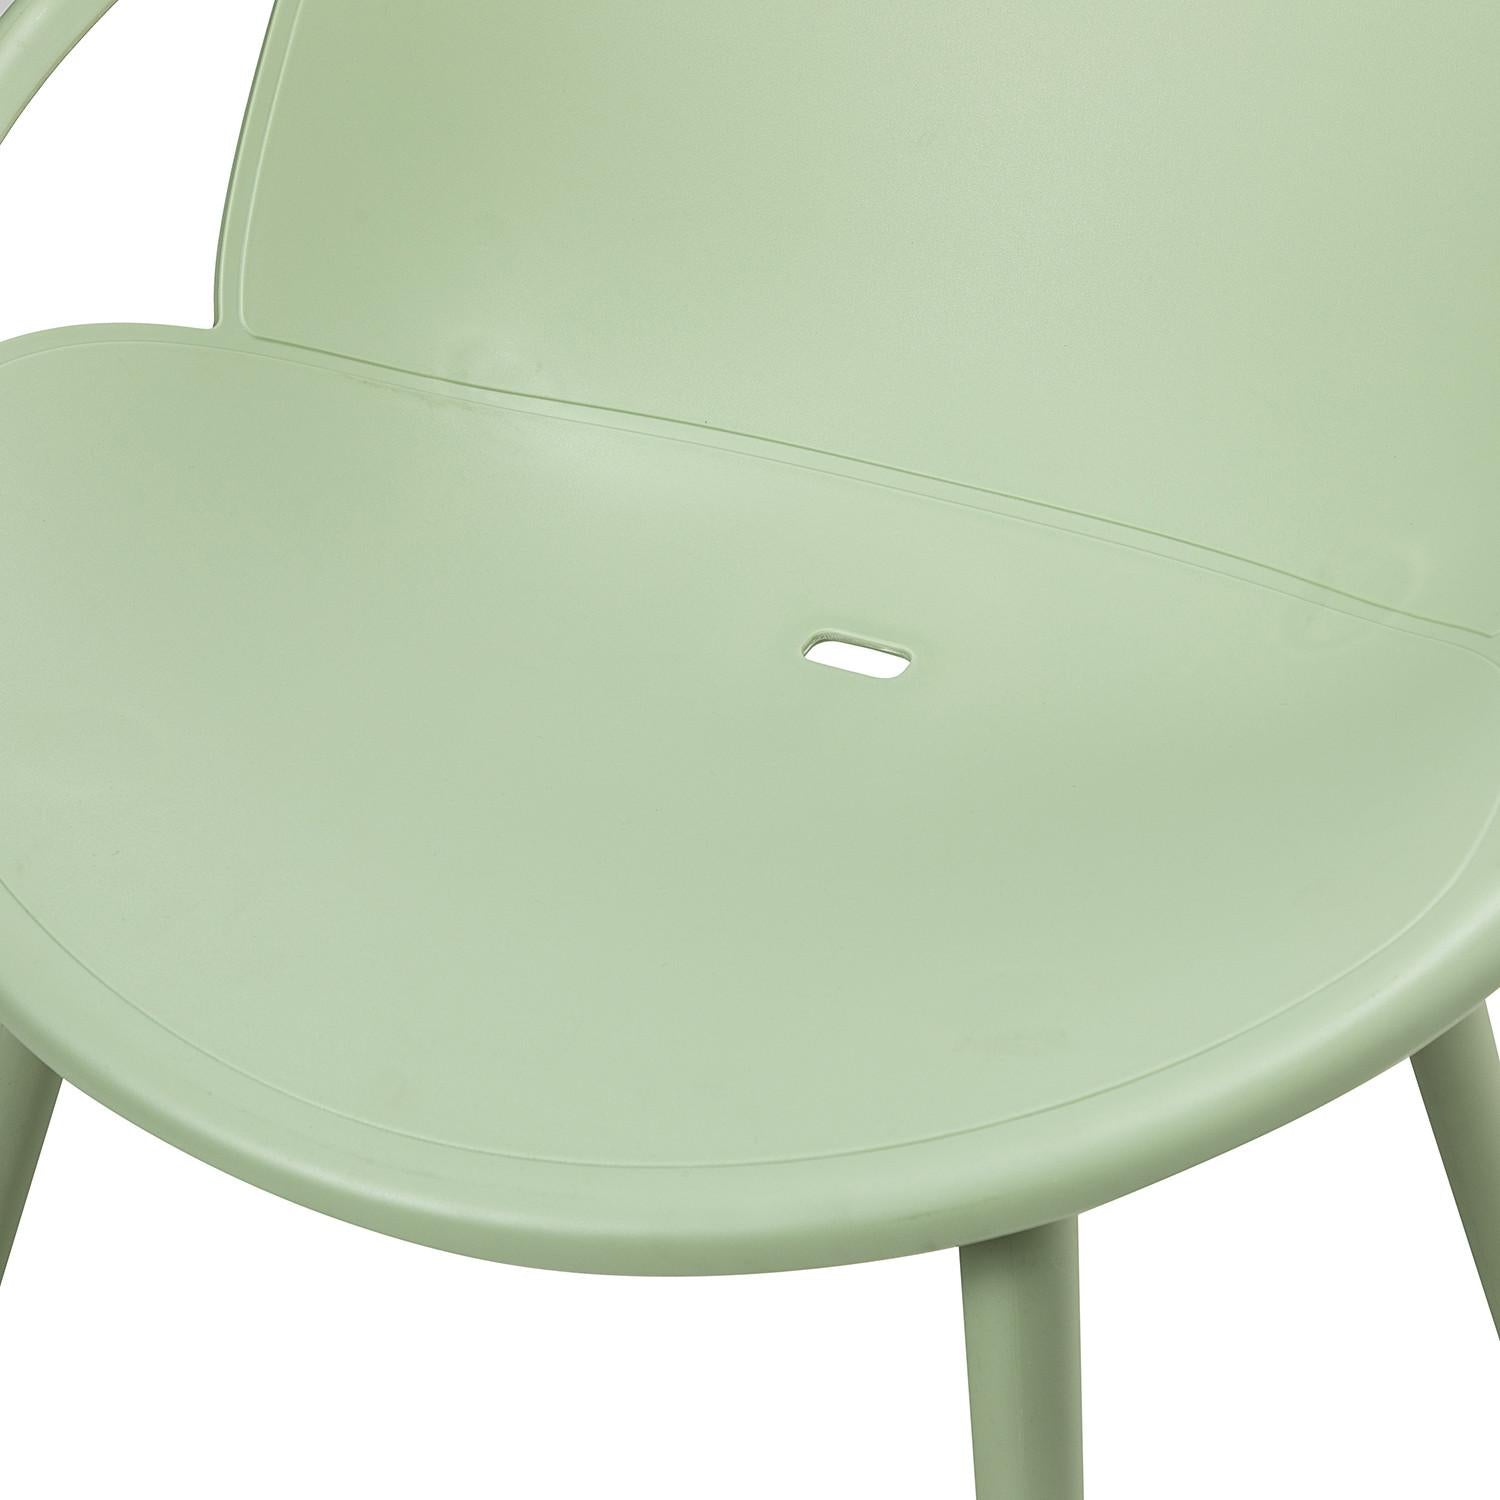 Solid Pale Green Saucer Outdoor Chairs and Table Set